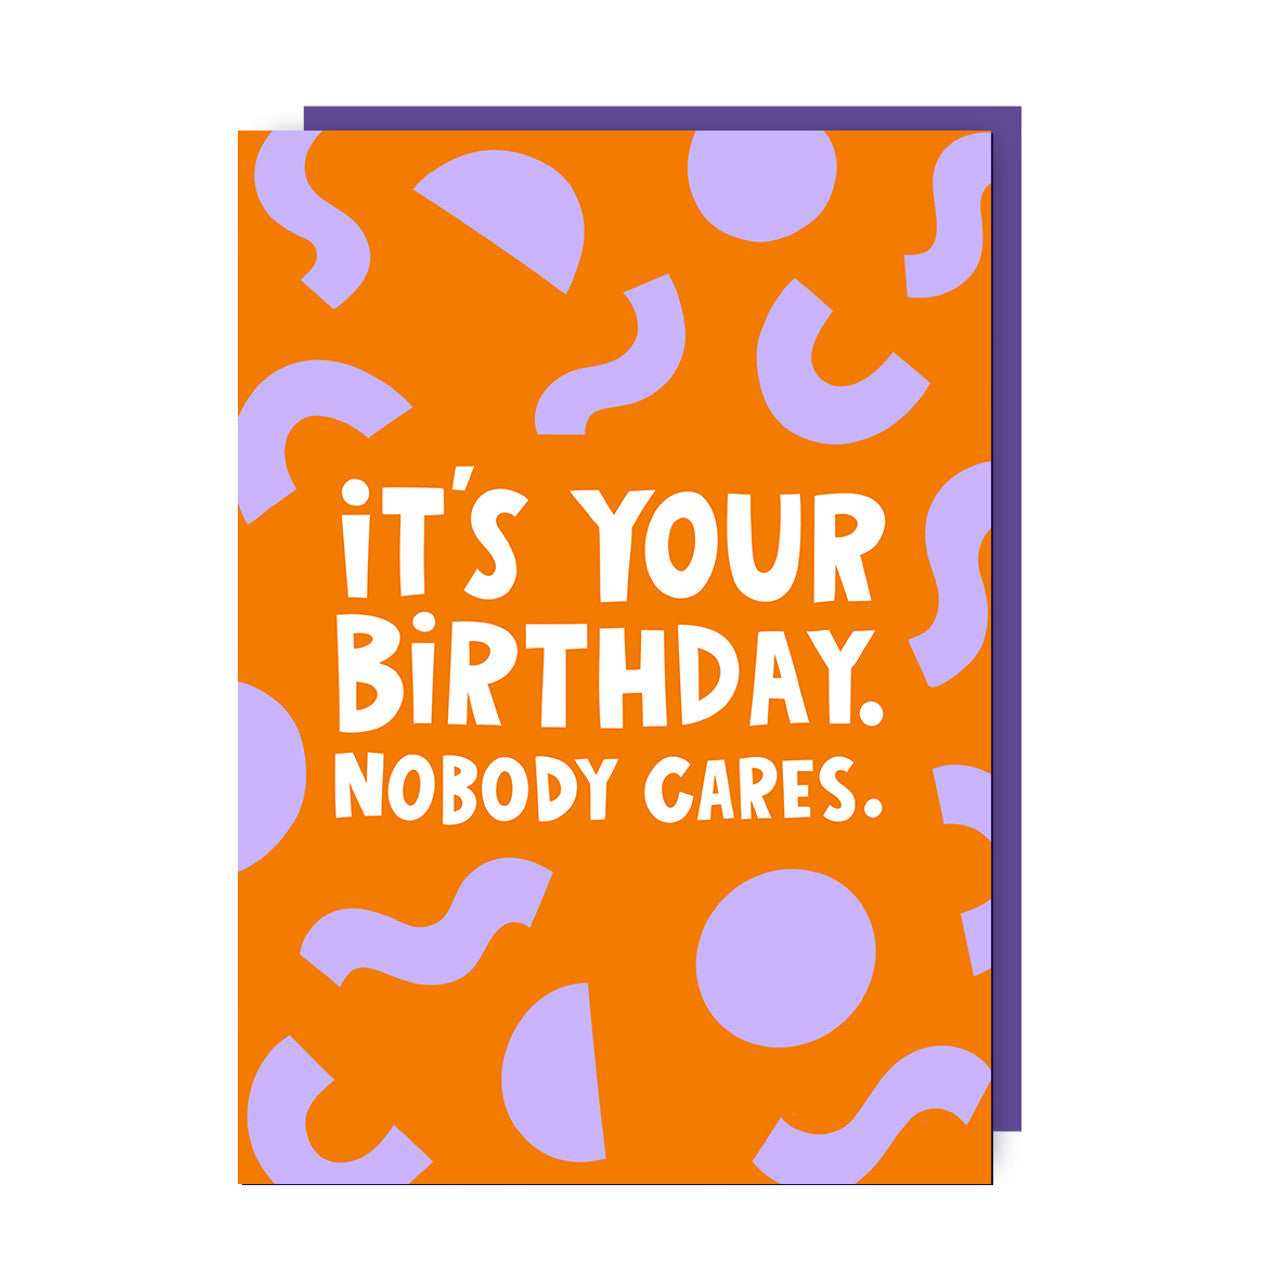 Birthday Card text reads "It's your birthday. Nobody Cares."